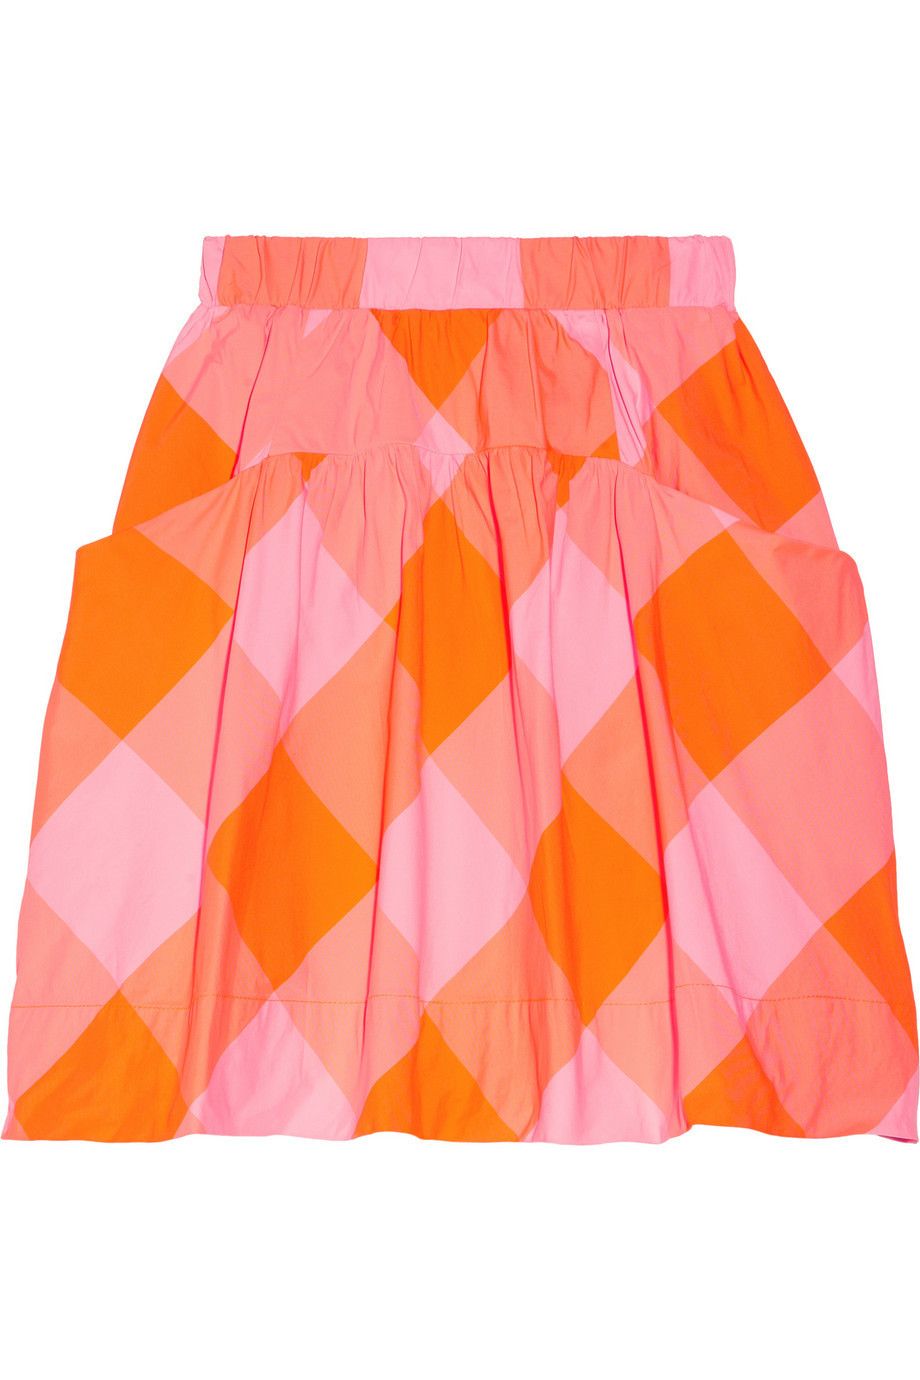 Yellow, Orange, Textile, Peach, Pink, Amber, Pattern, Tints and shades, Colorfulness, Umbrella, 